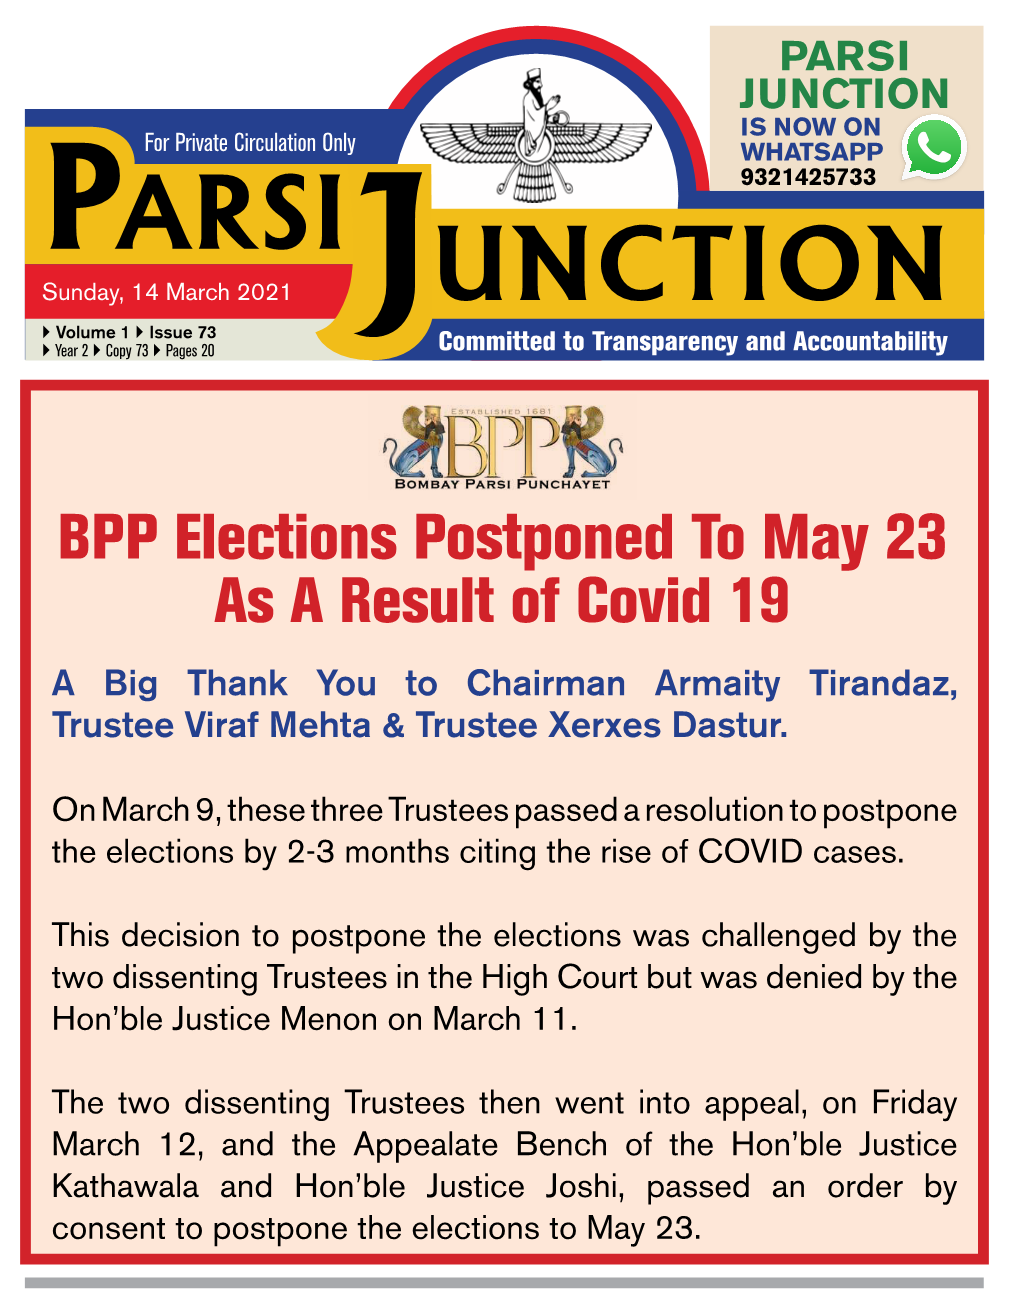 BPP Elections Postponed to May 23 As a Result of Covid 19 a Big Thank You to Chairman Armaity Tirandaz, Trustee Viraf Mehta & Trustee Xerxes Dastur